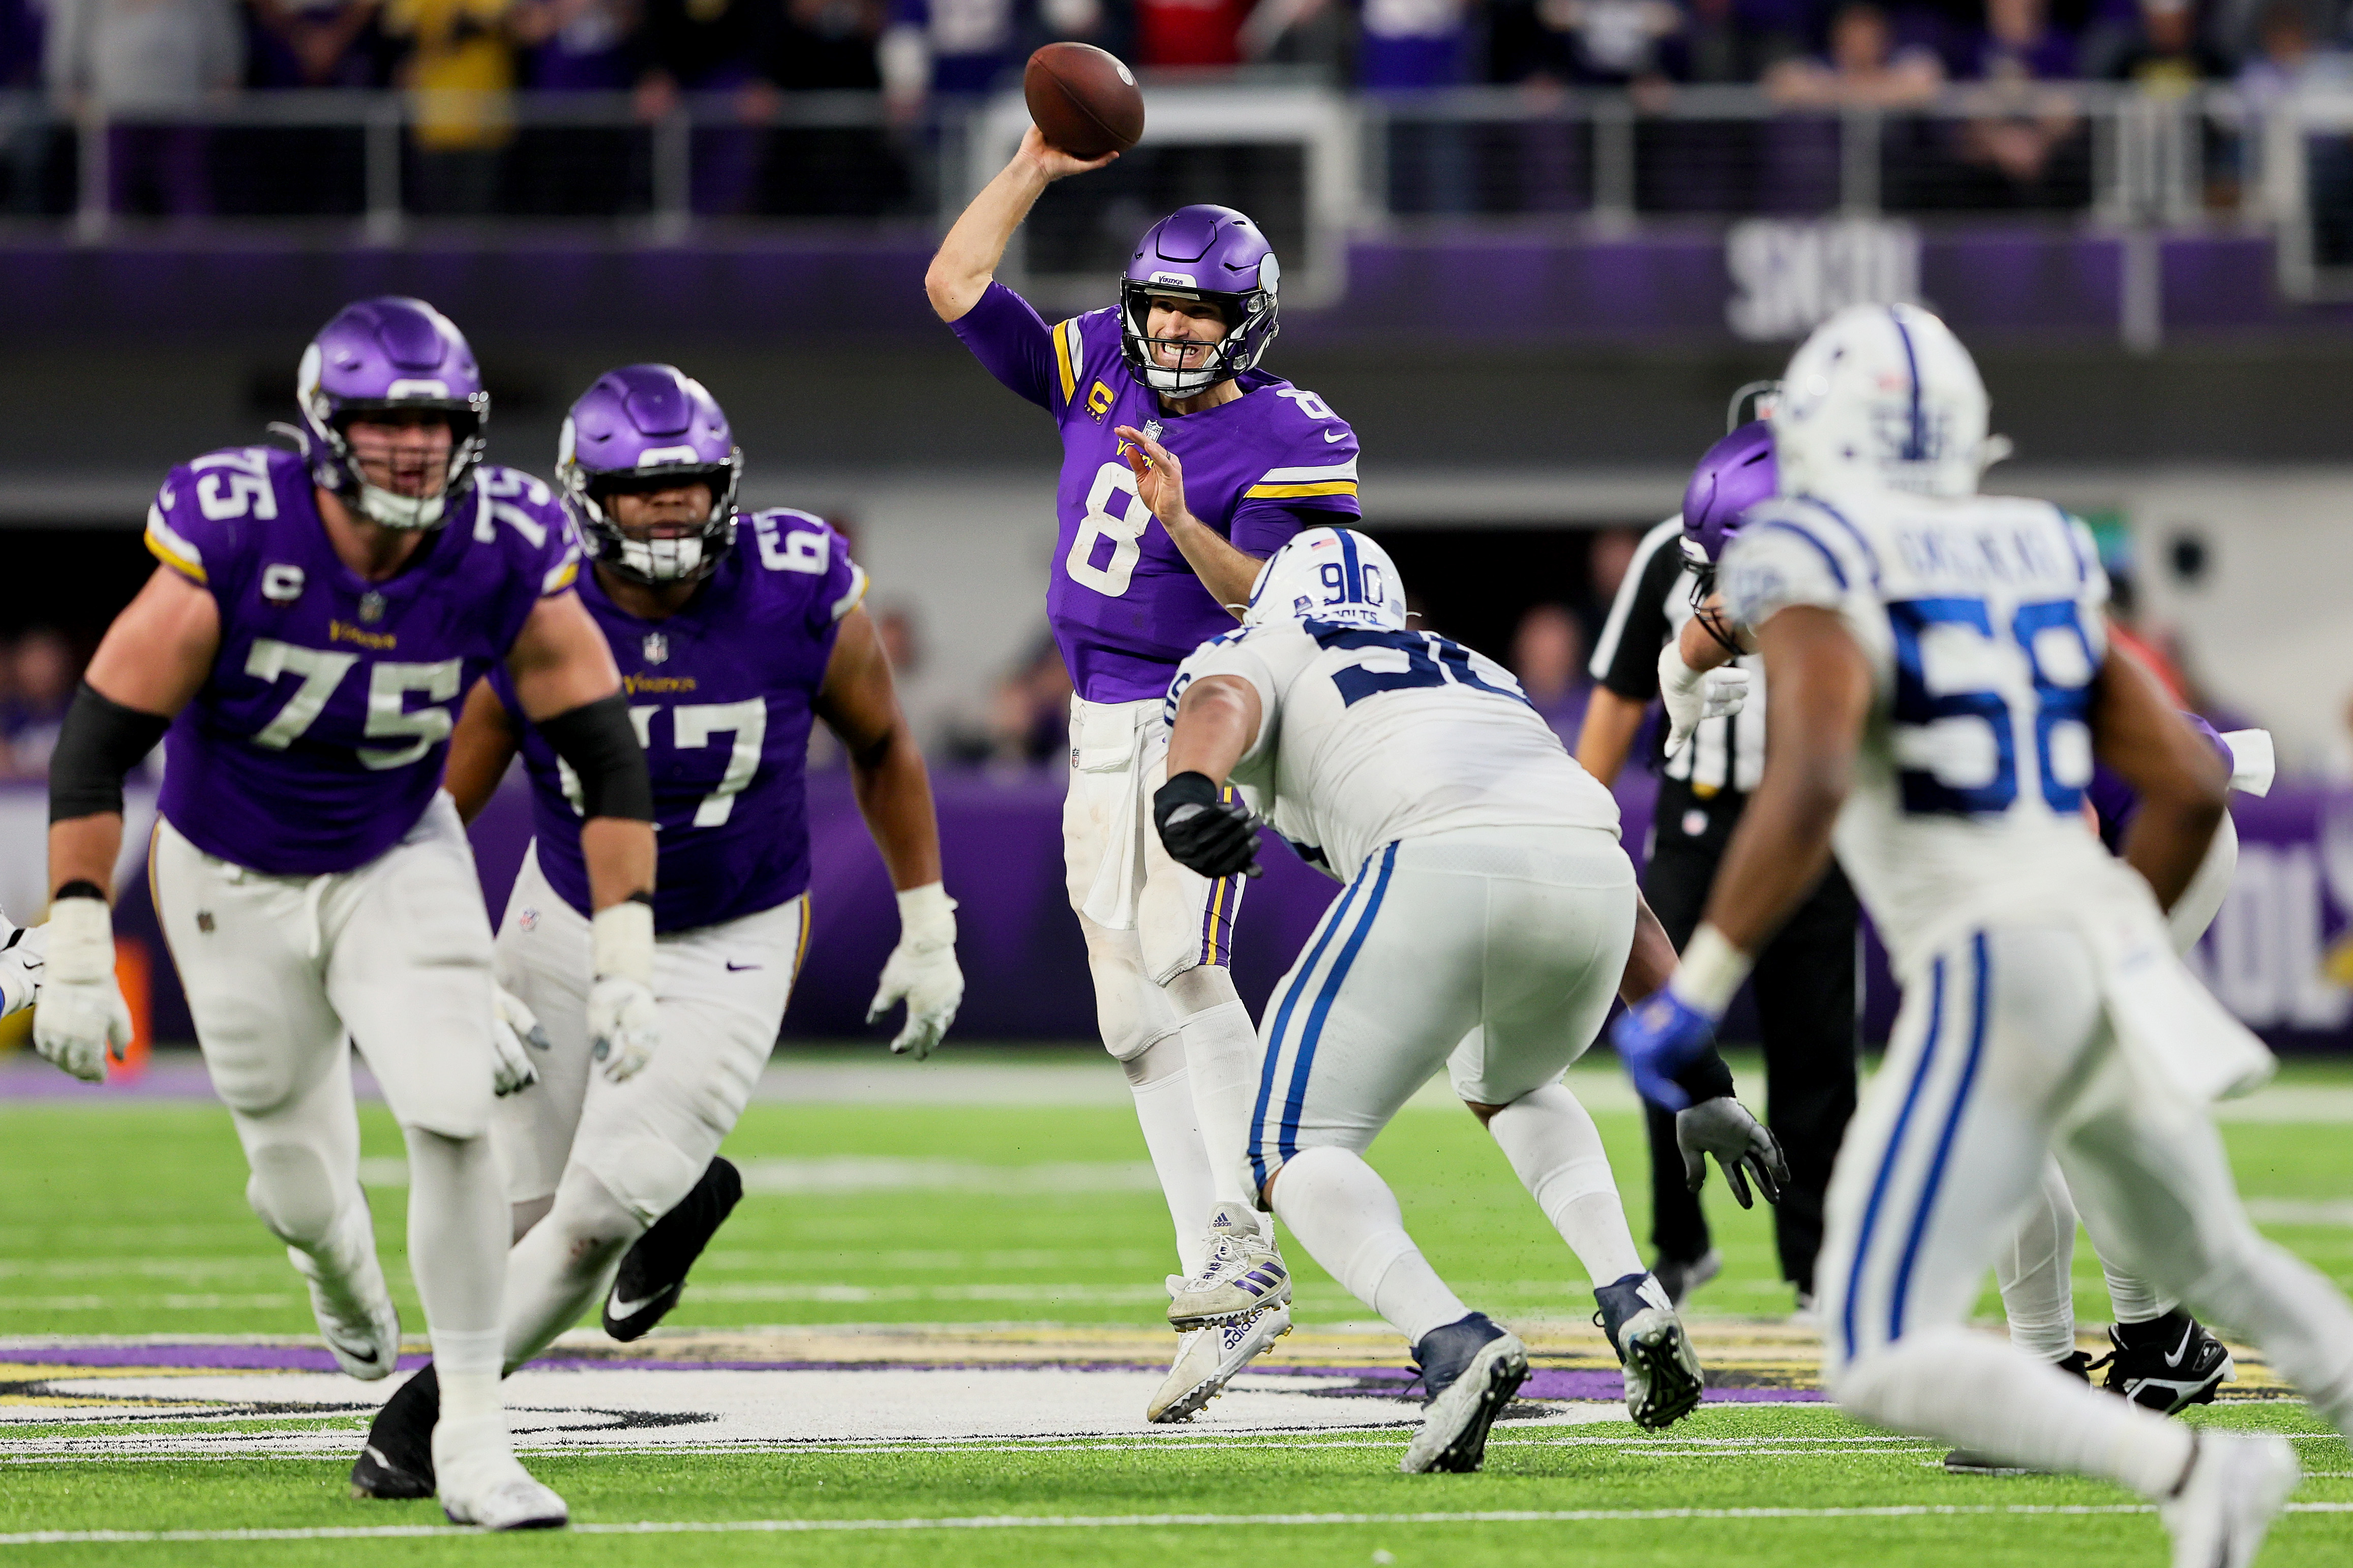 Quarterback Kirk Cousins (#8) of the Minnesota Vikings passes in the game against the Indianapolis Colts at U.S. Bank Stadium in Minneapolis, Minnesota, December 17, 2022. /CFP